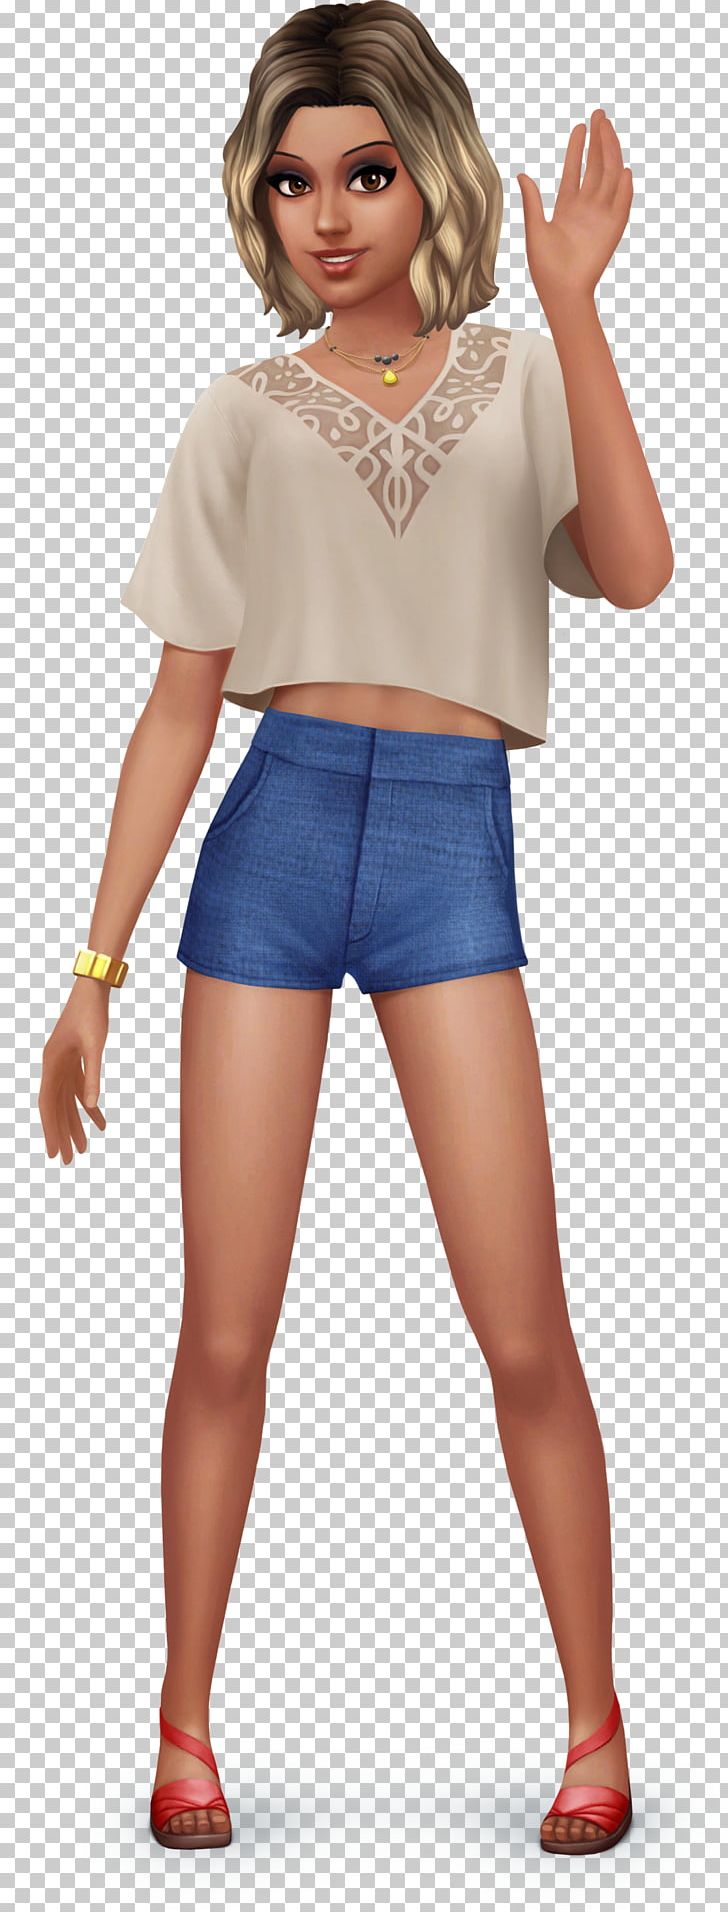 The Sims Mobile The Sims 3: Island Paradise The Sims Online The Sims 4: Get To Work PNG, Clipart, Abdomen, Brown Hair, Clothing, Costume, Electric Blue Free PNG Download